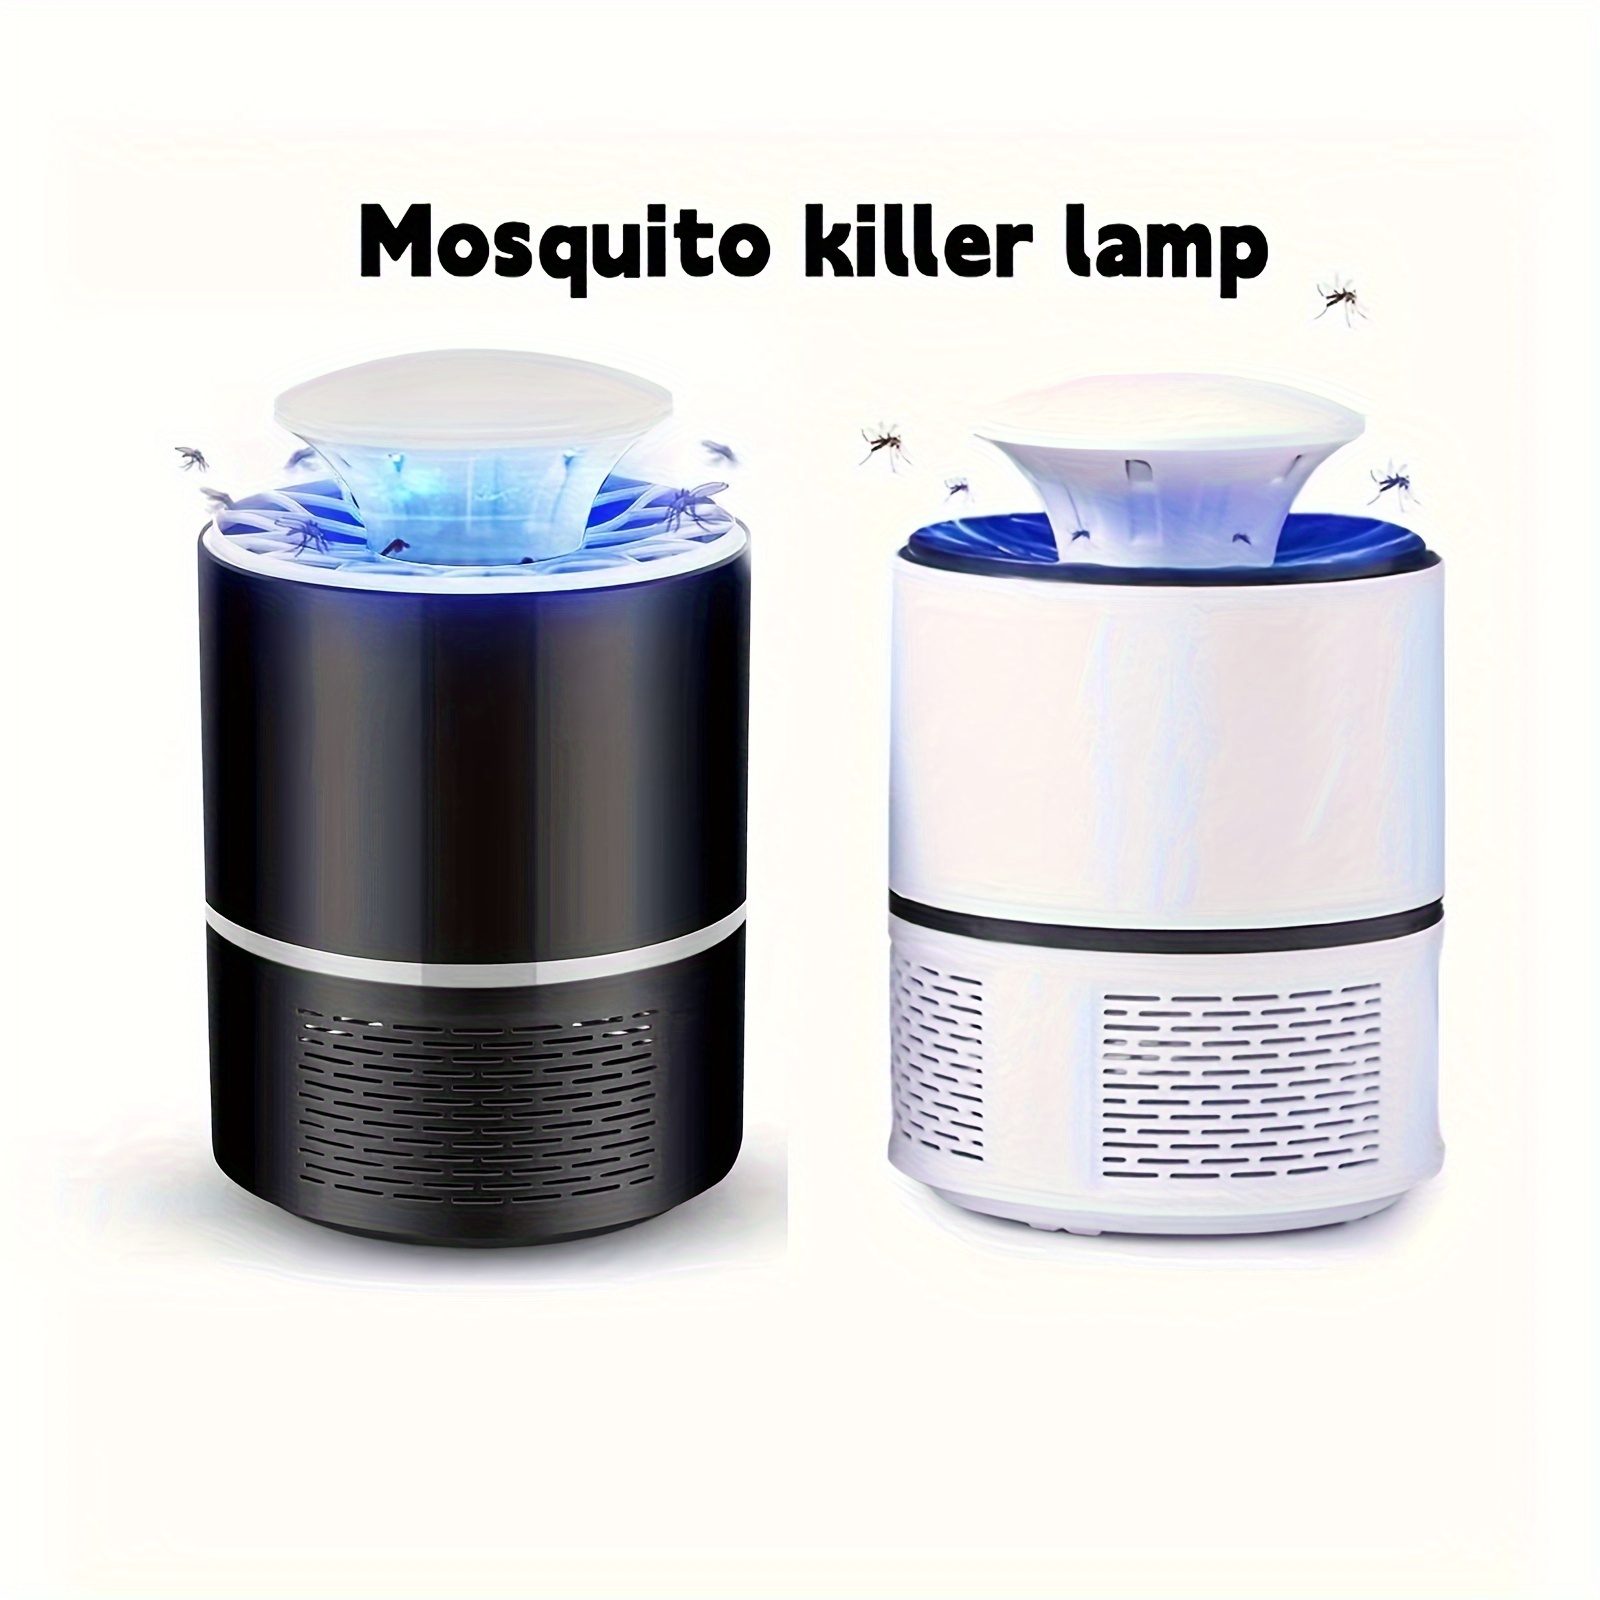 Inhalation Type Electric Shock Mosquito Killer Lamp Household Bedroom  Trapping Insect Light Catalyst Silent Electronic Mosquito Killer